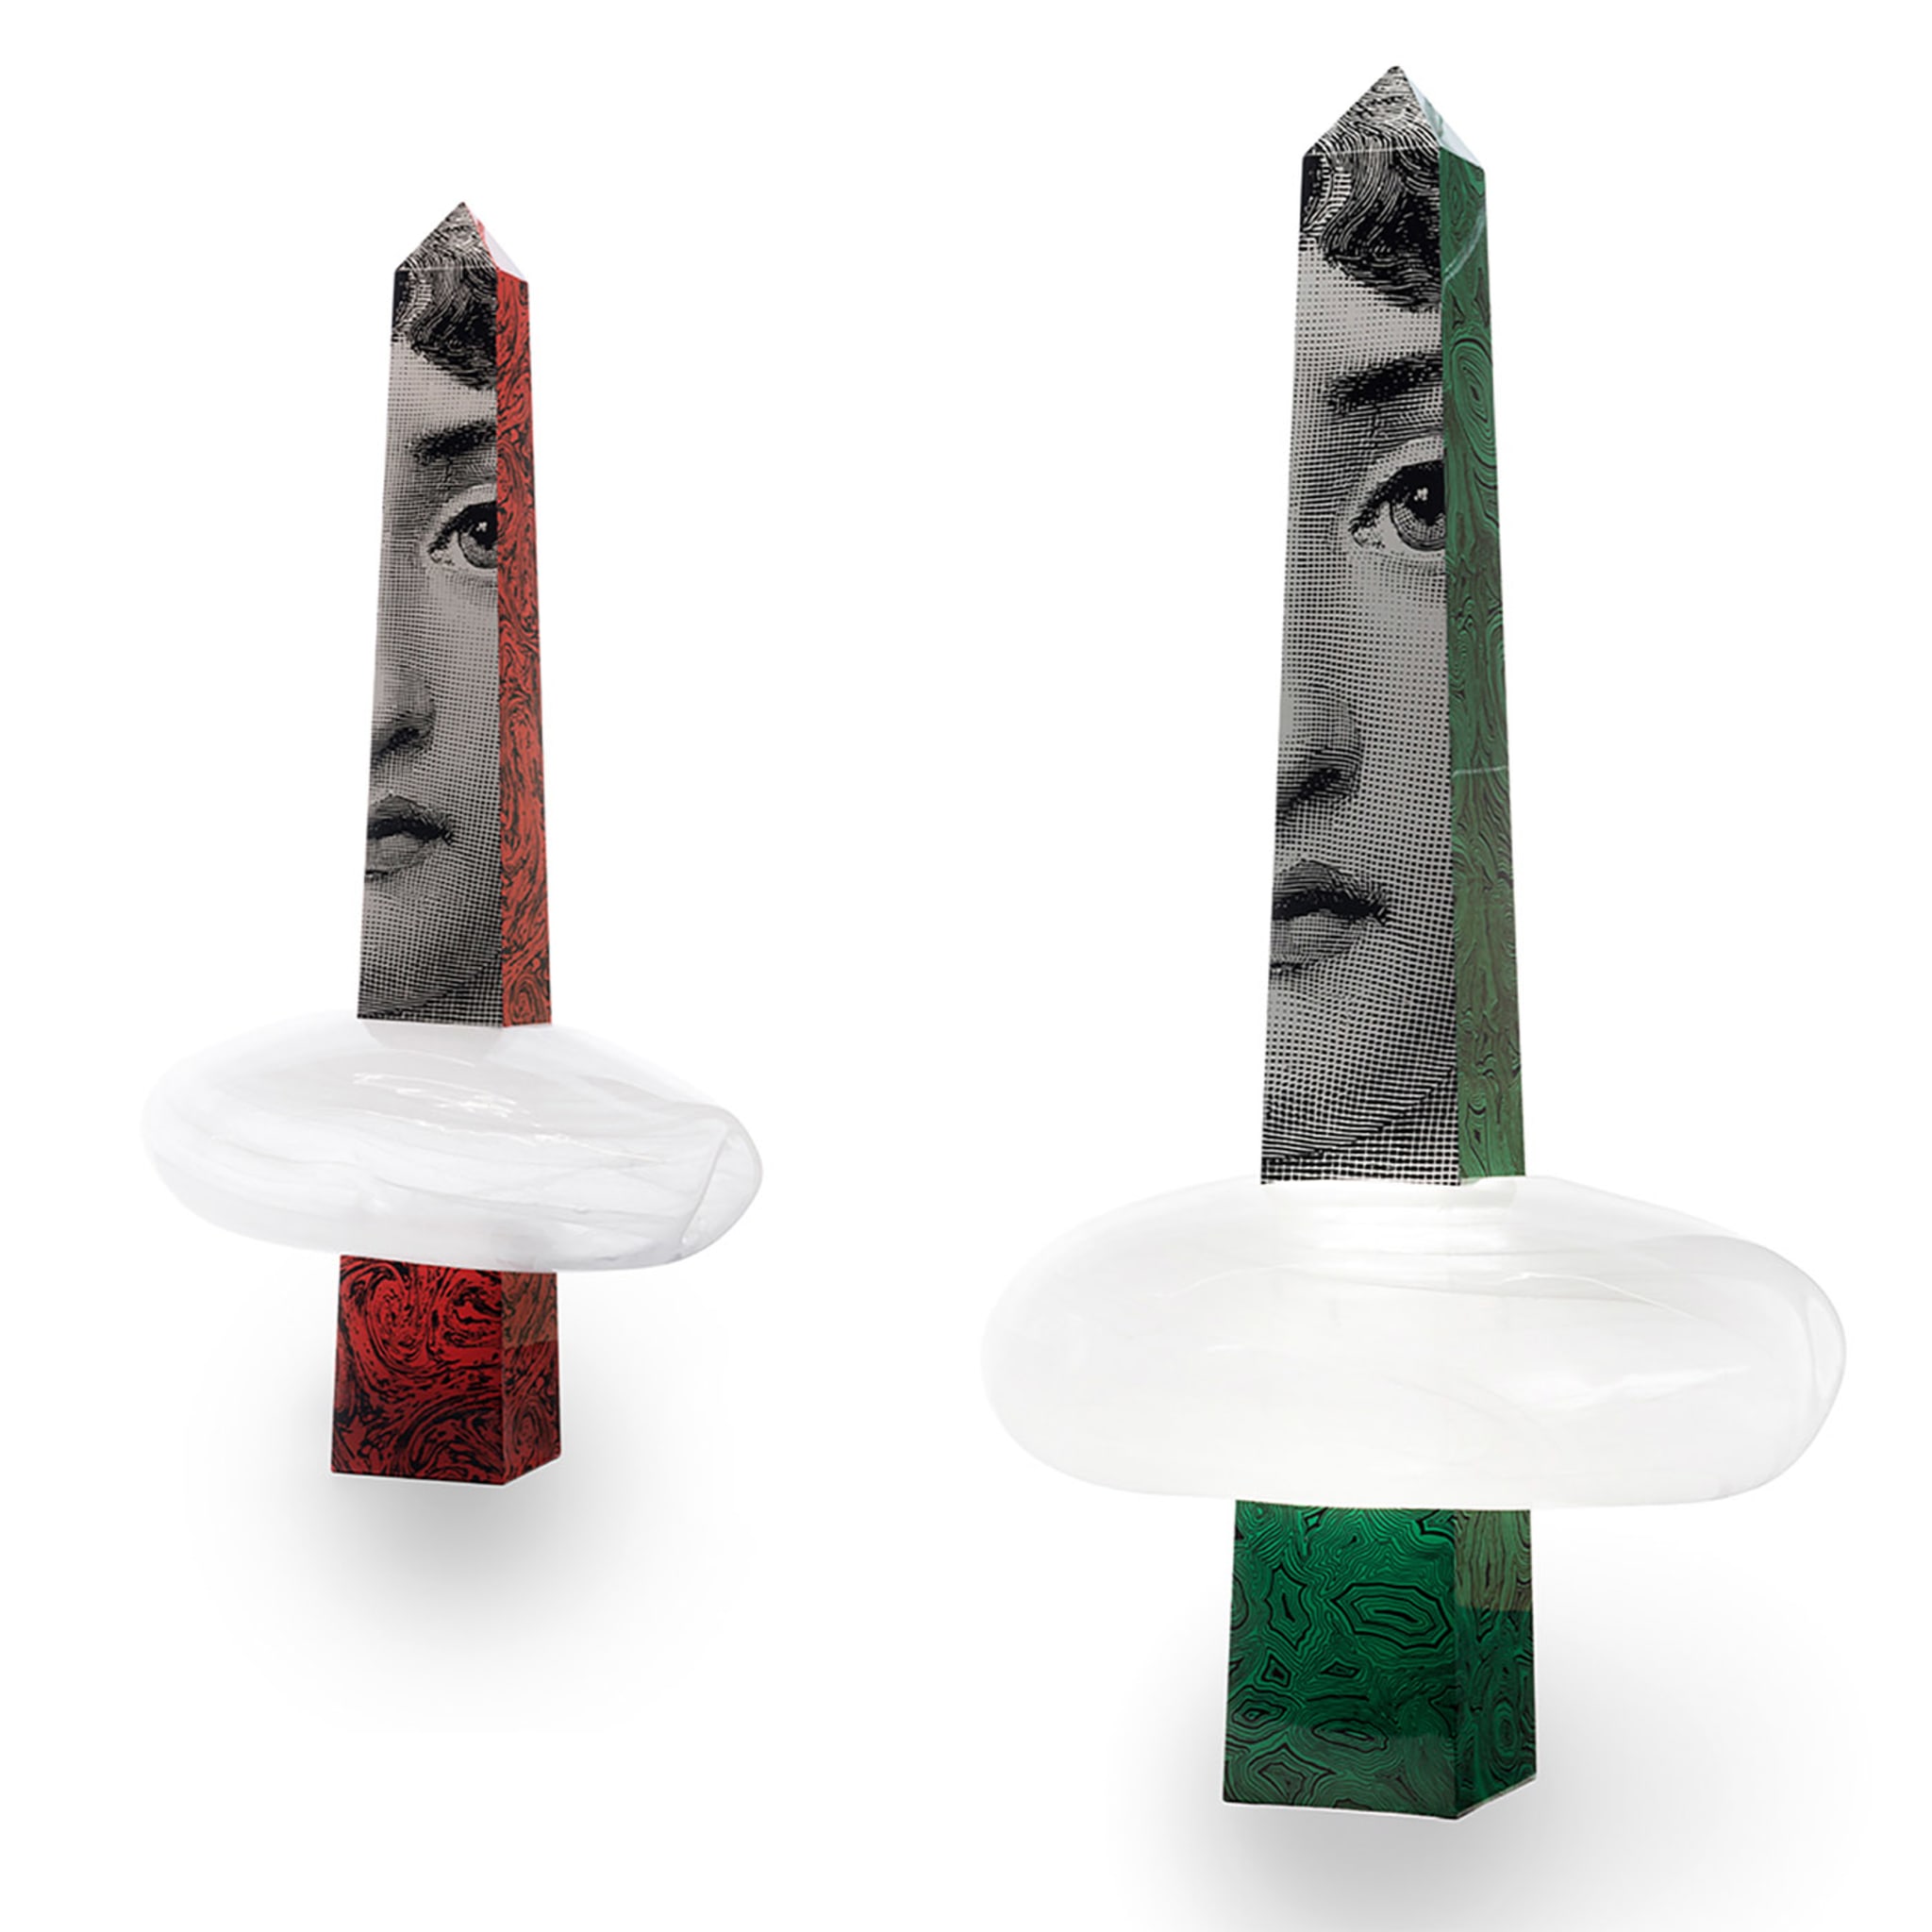 Through The Clouds Large Pendant Lamp by Atelier Fornasetti - Alternative view 1